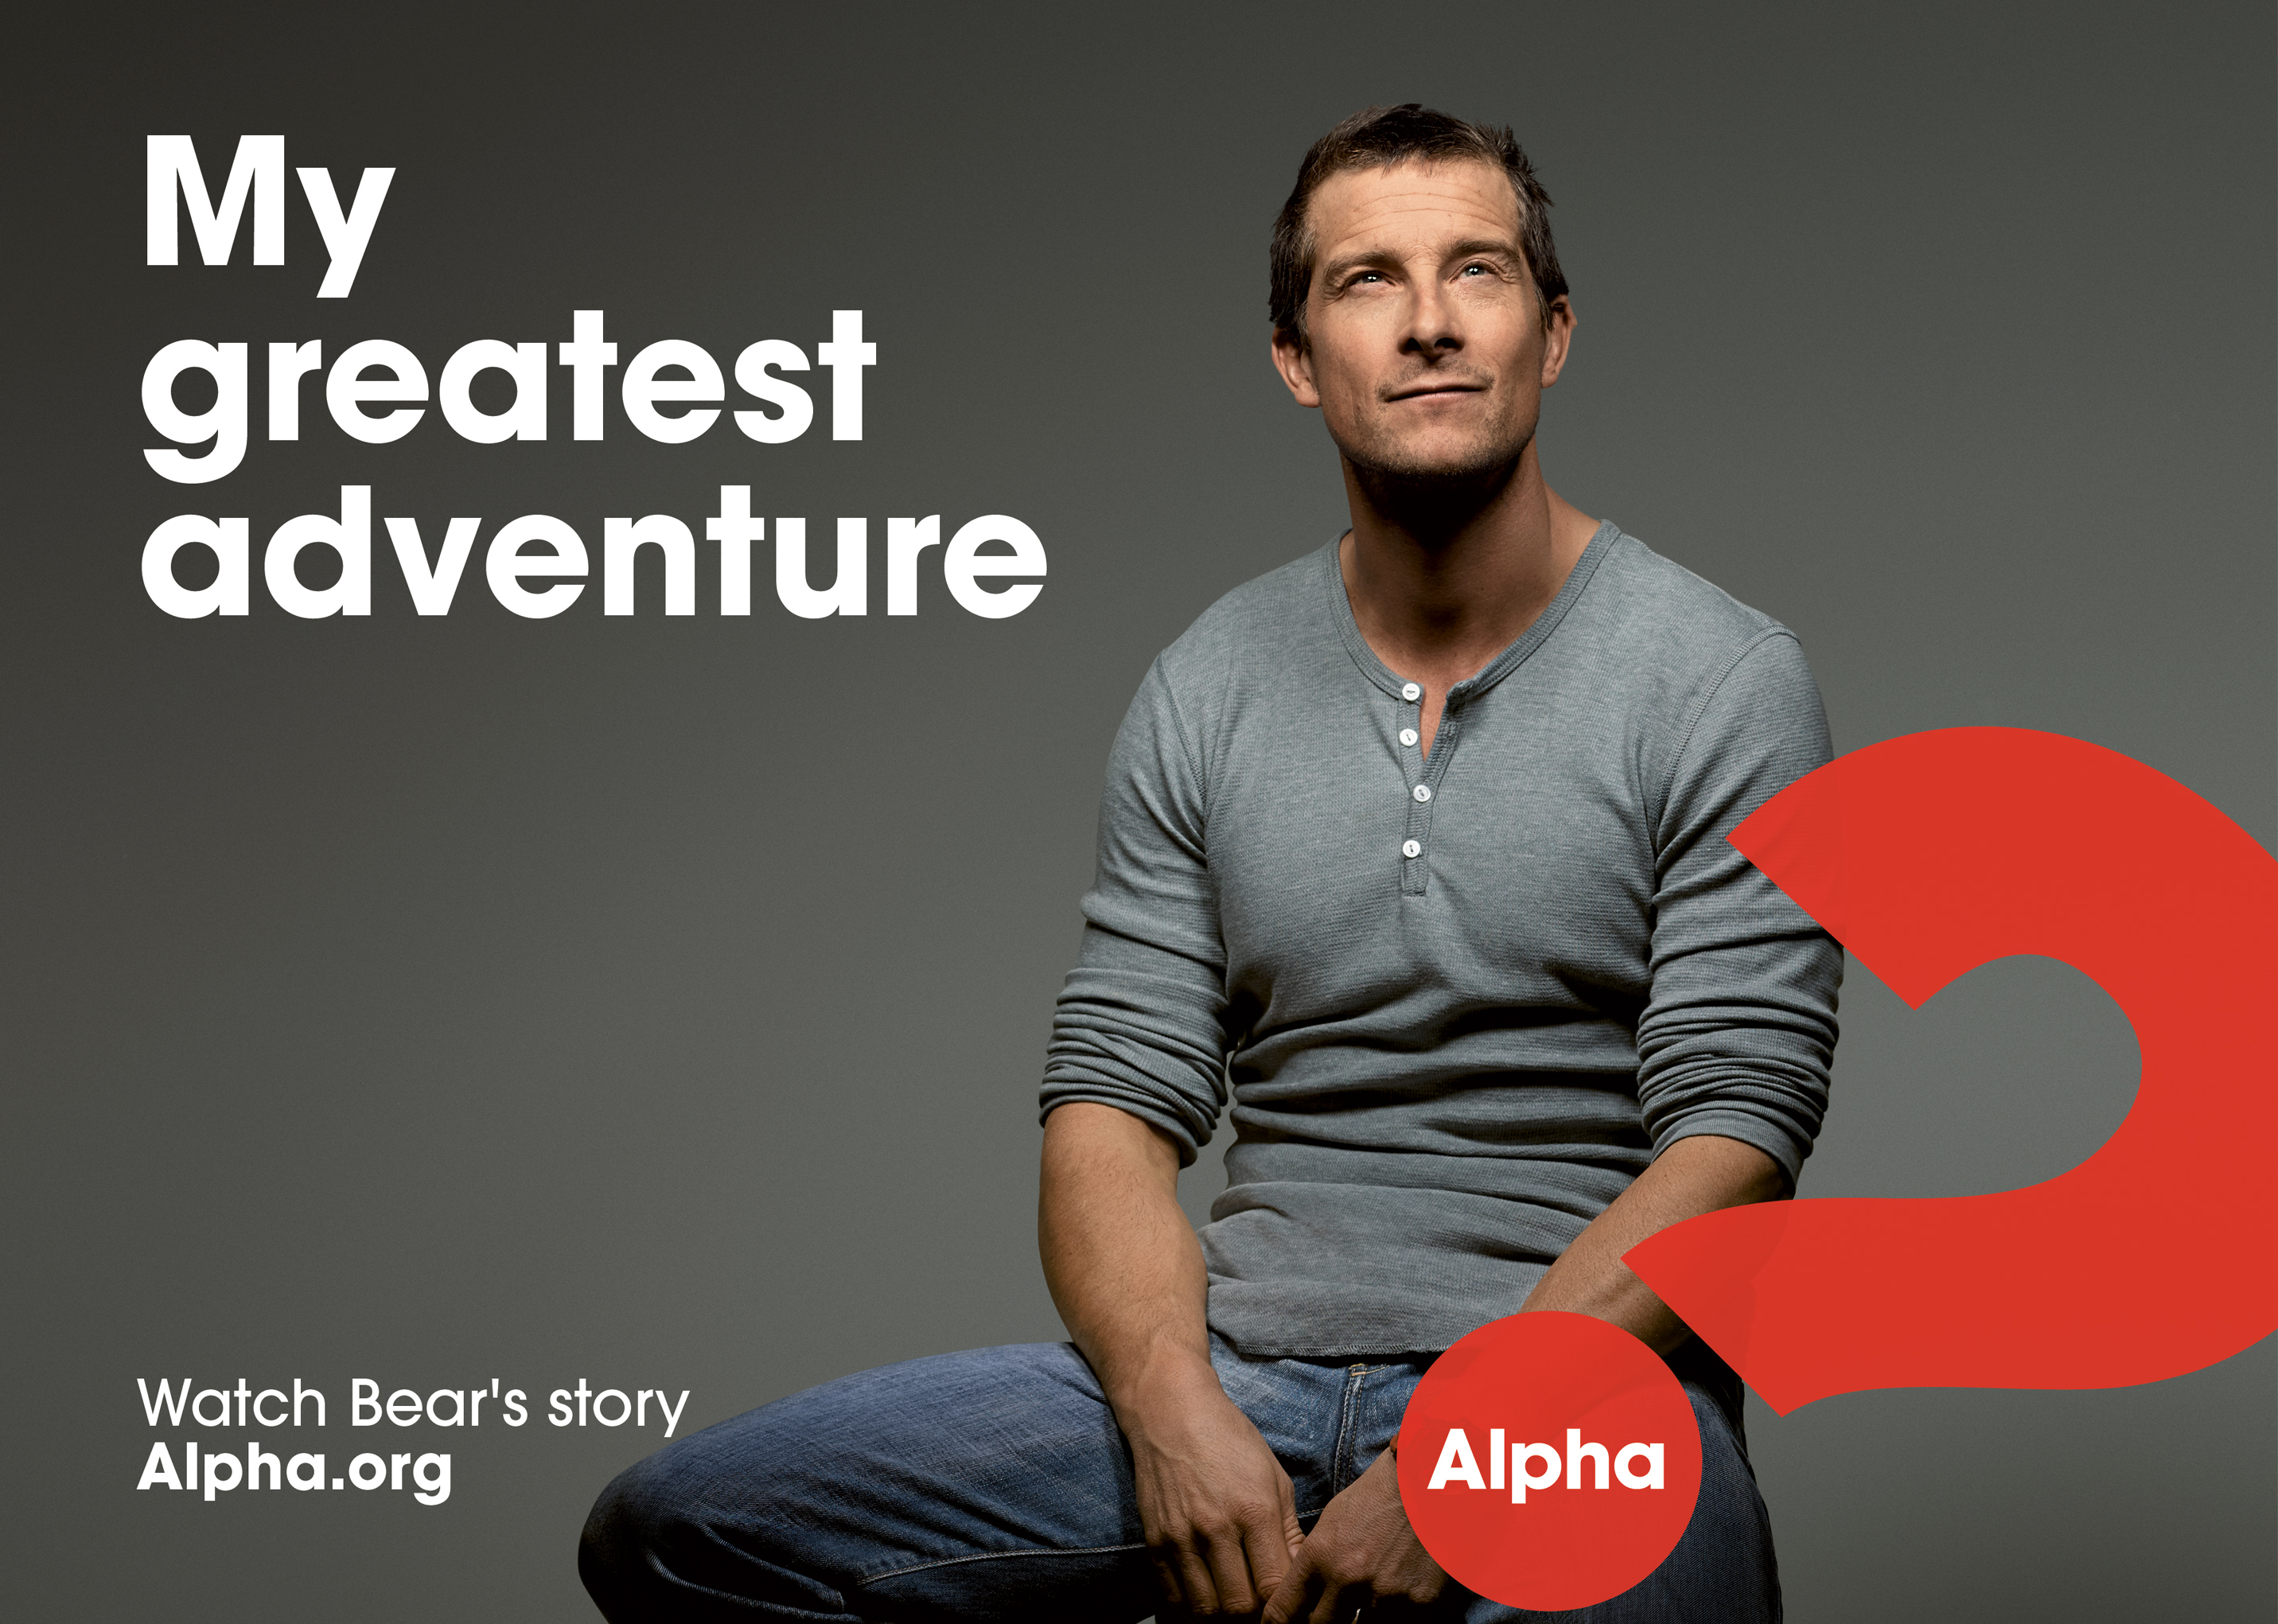 Bear Grylls fronts the Global Alpha Campaign